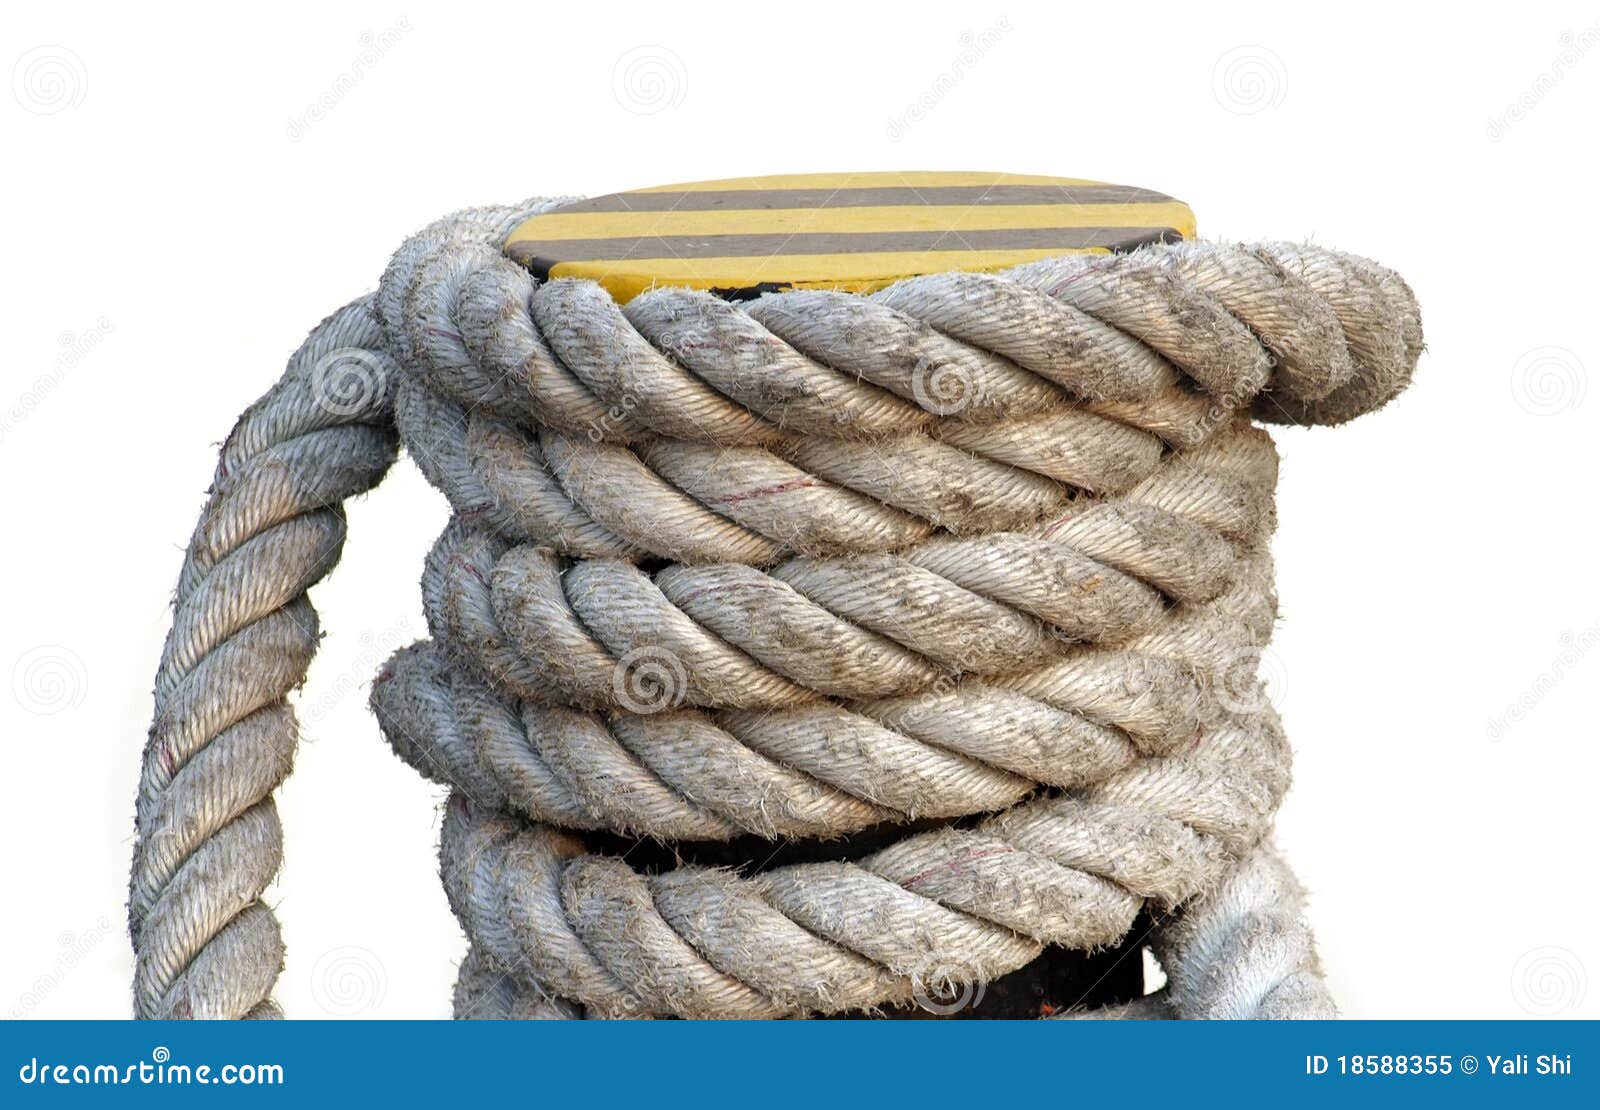 Mooring Post with Large Rope Stock Image - Image of firm, line